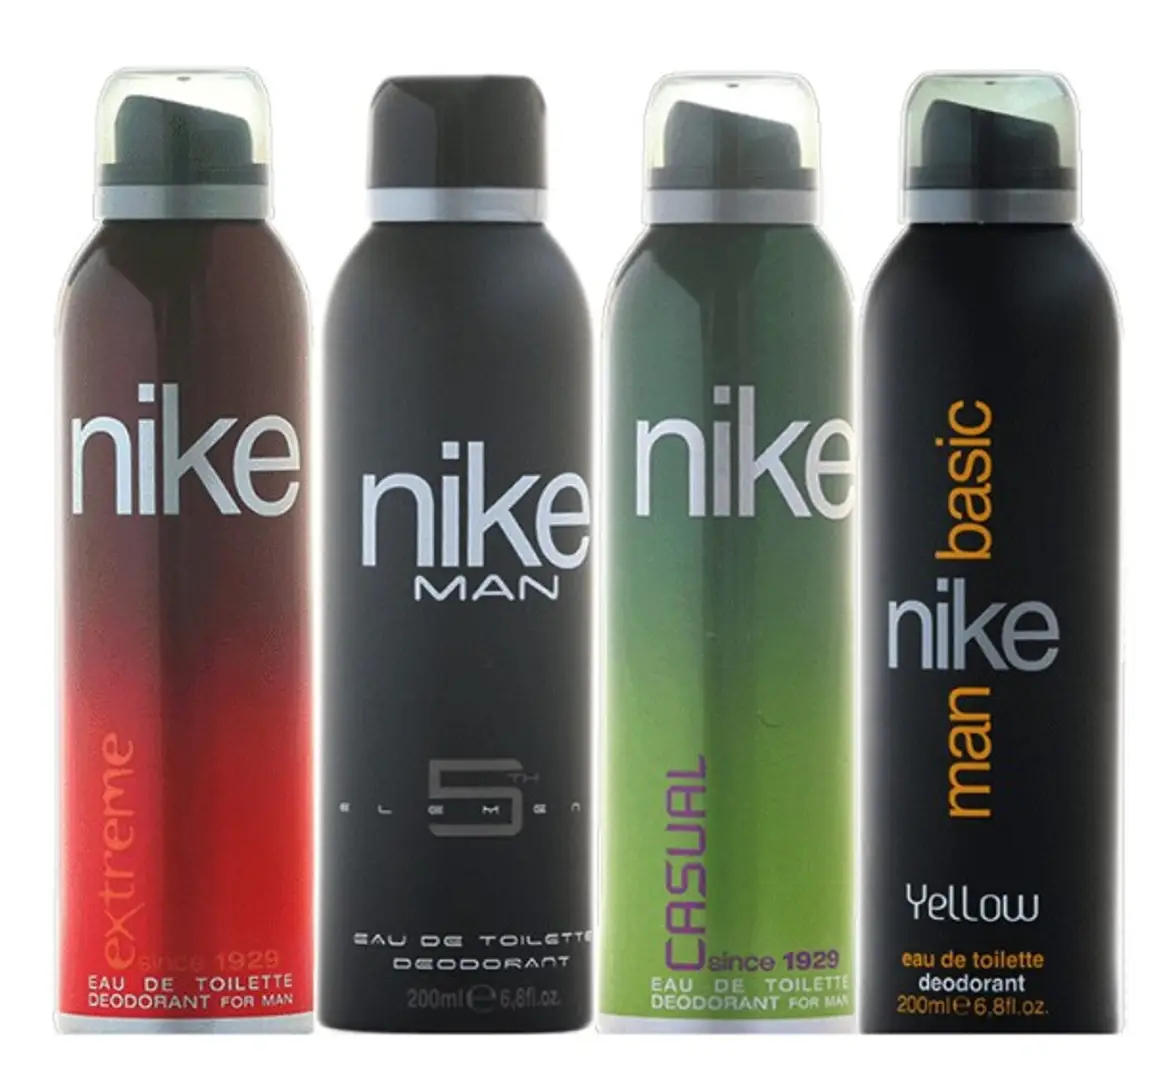 Duiker snelheid nood Buy Nike Men Deo Set, 4 X 200ml (Casual, Element, Yellow and Extreme) -  Lowest price in India| GlowRoad